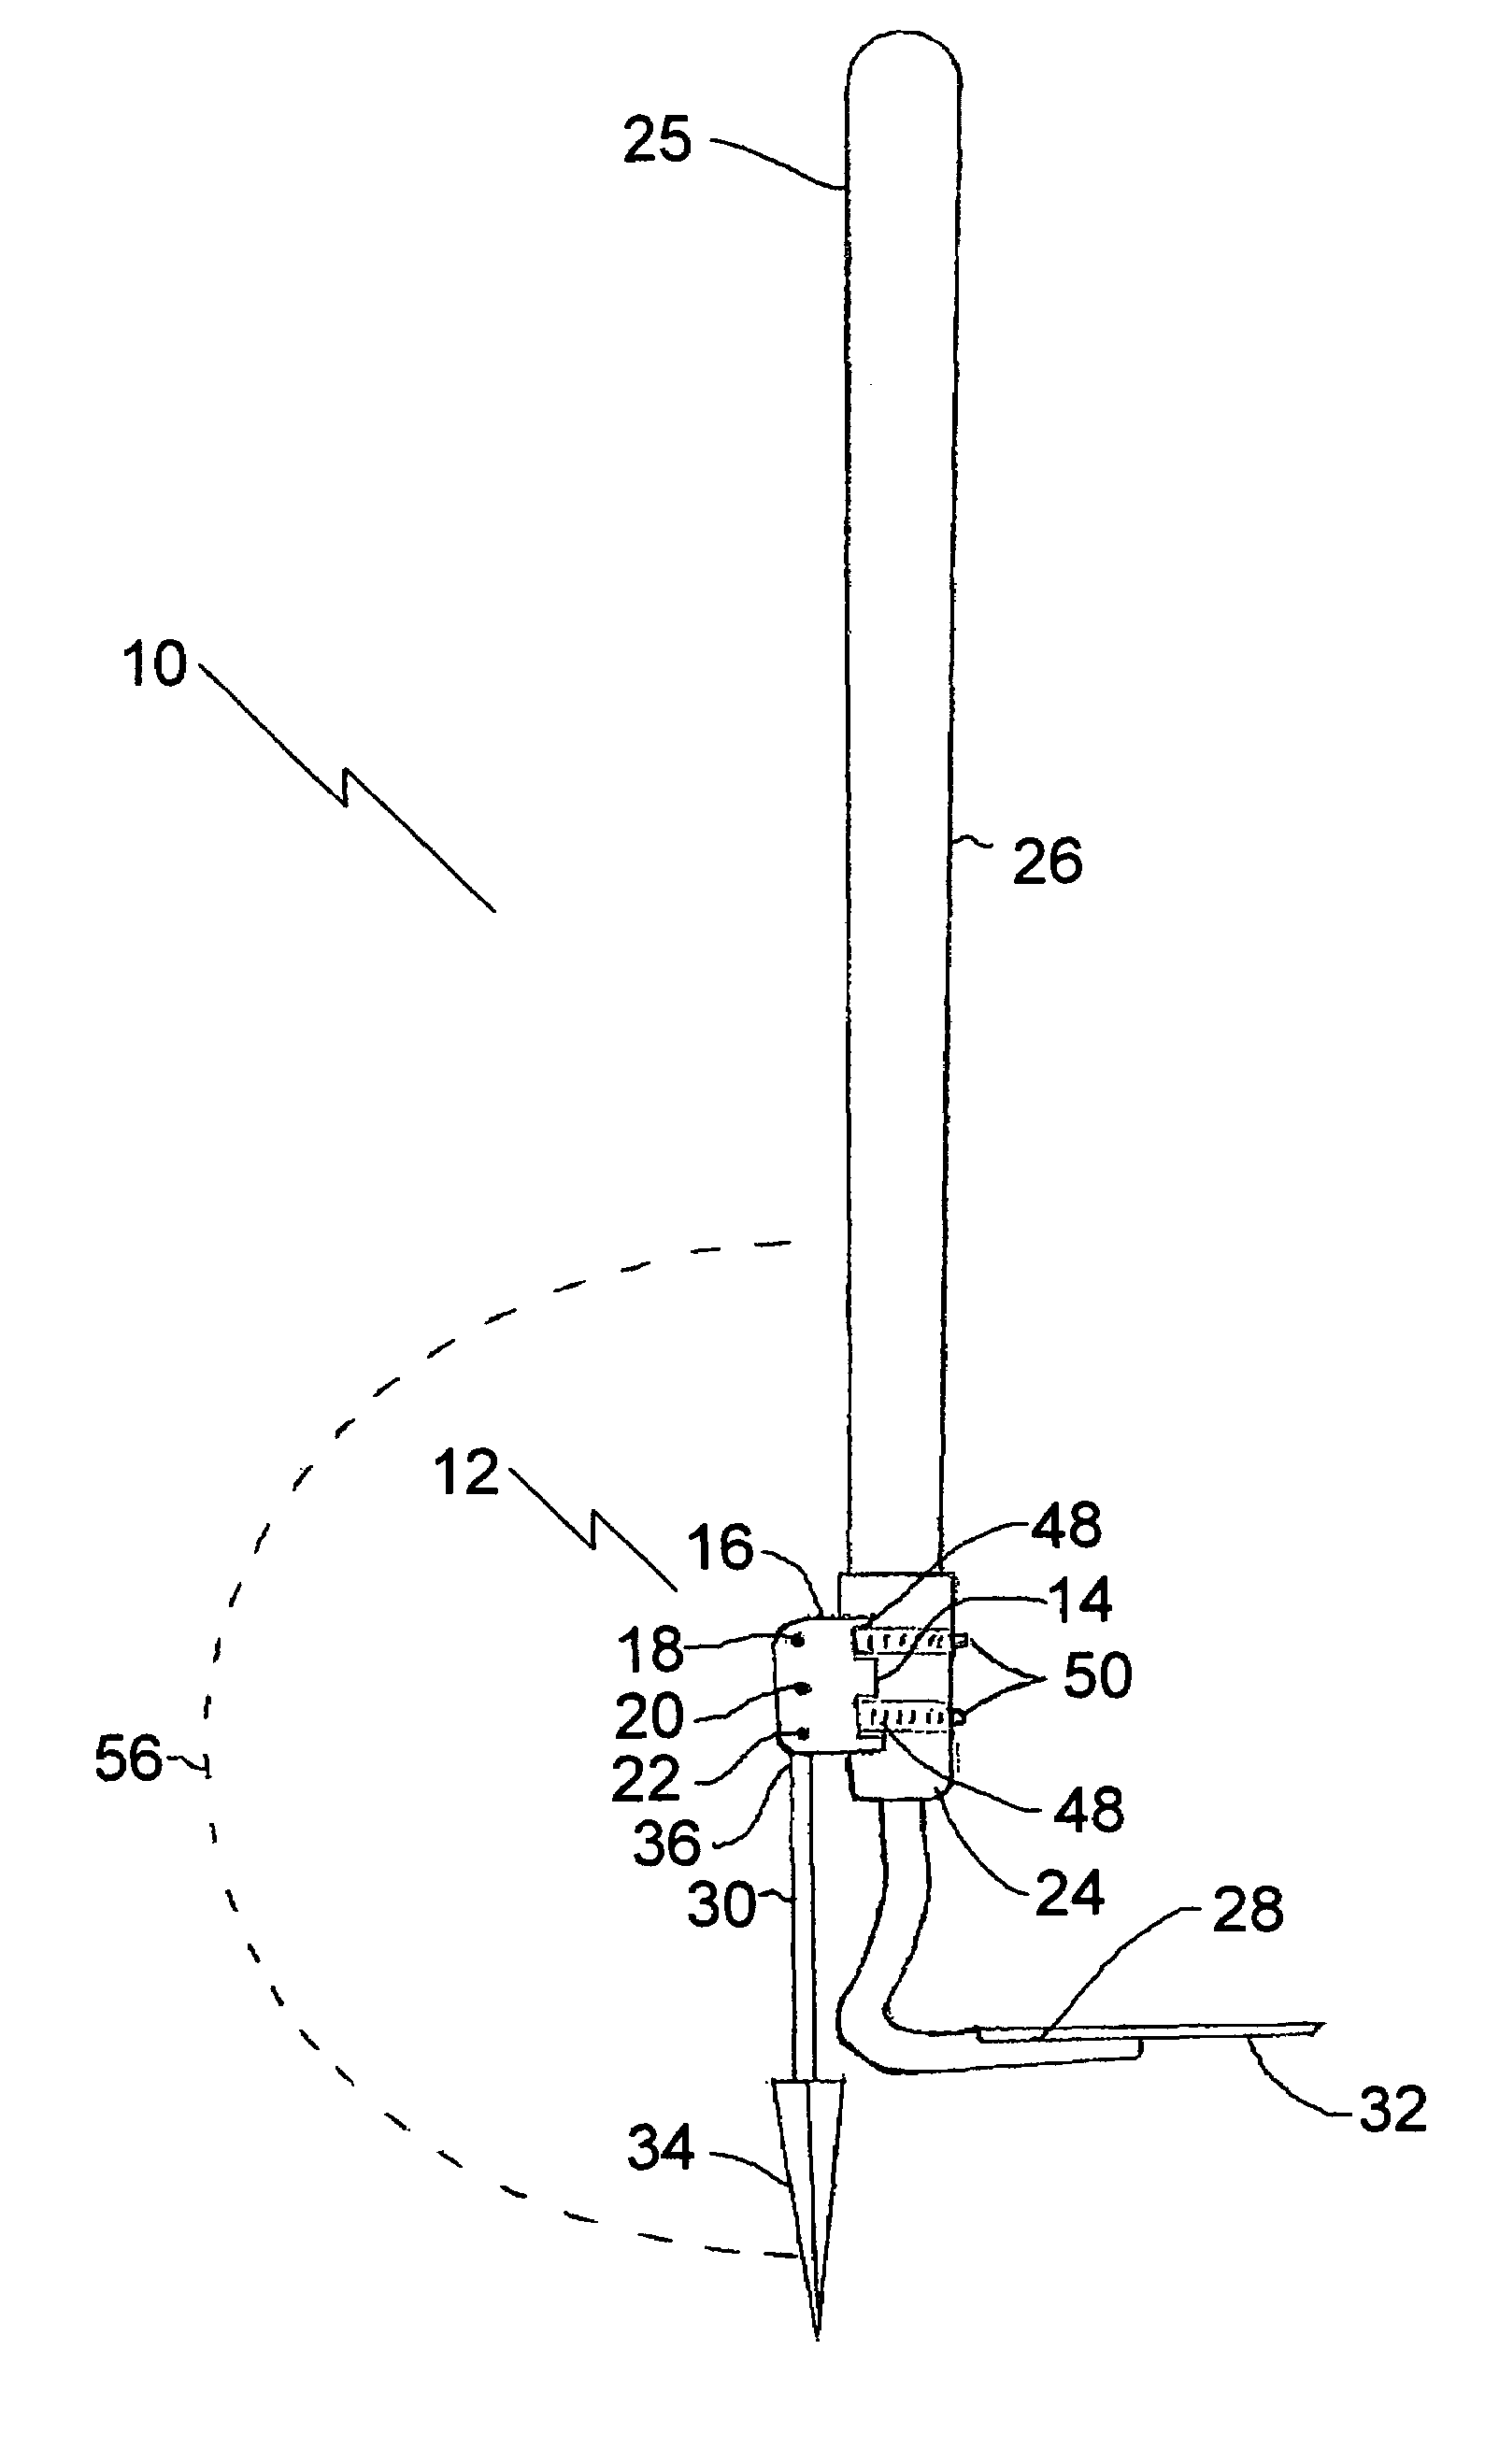 Tool support apparatus